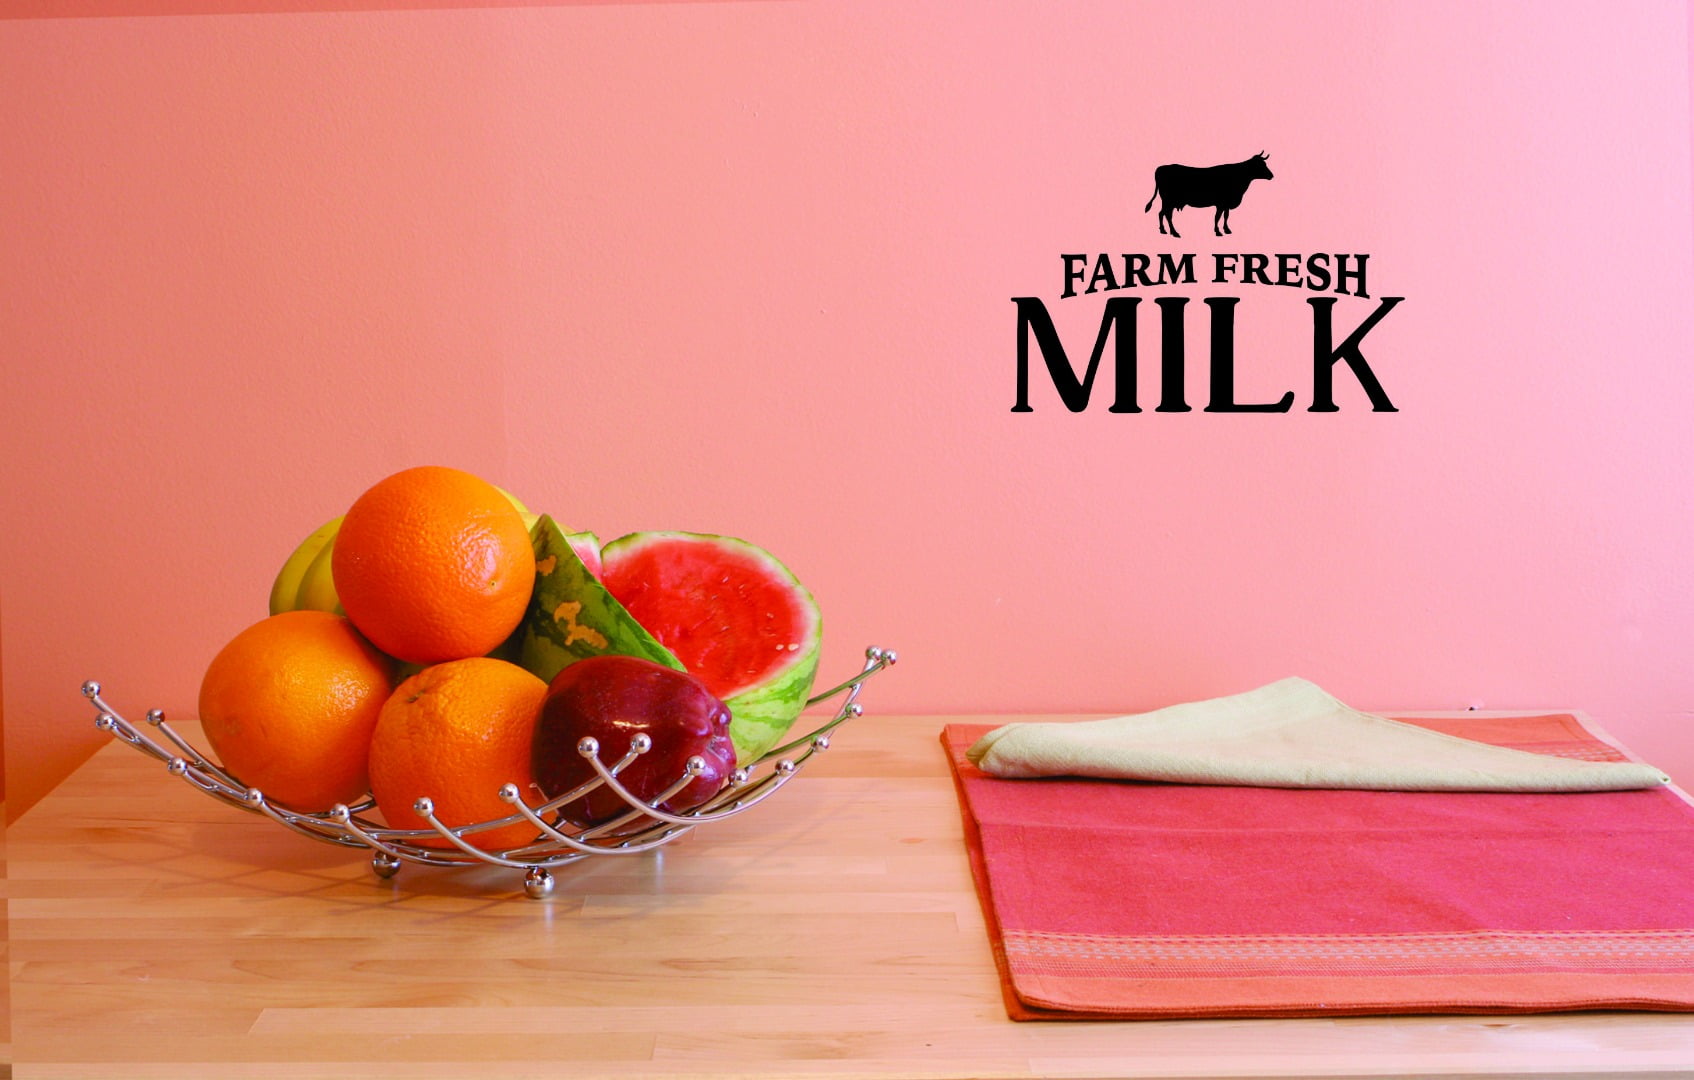 Black 20 x 40 20 Inches x 40 Inches Color Design with Vinyl JER 1825 3 Hot New Decals Farm Fresh Milk Wall Art Size 